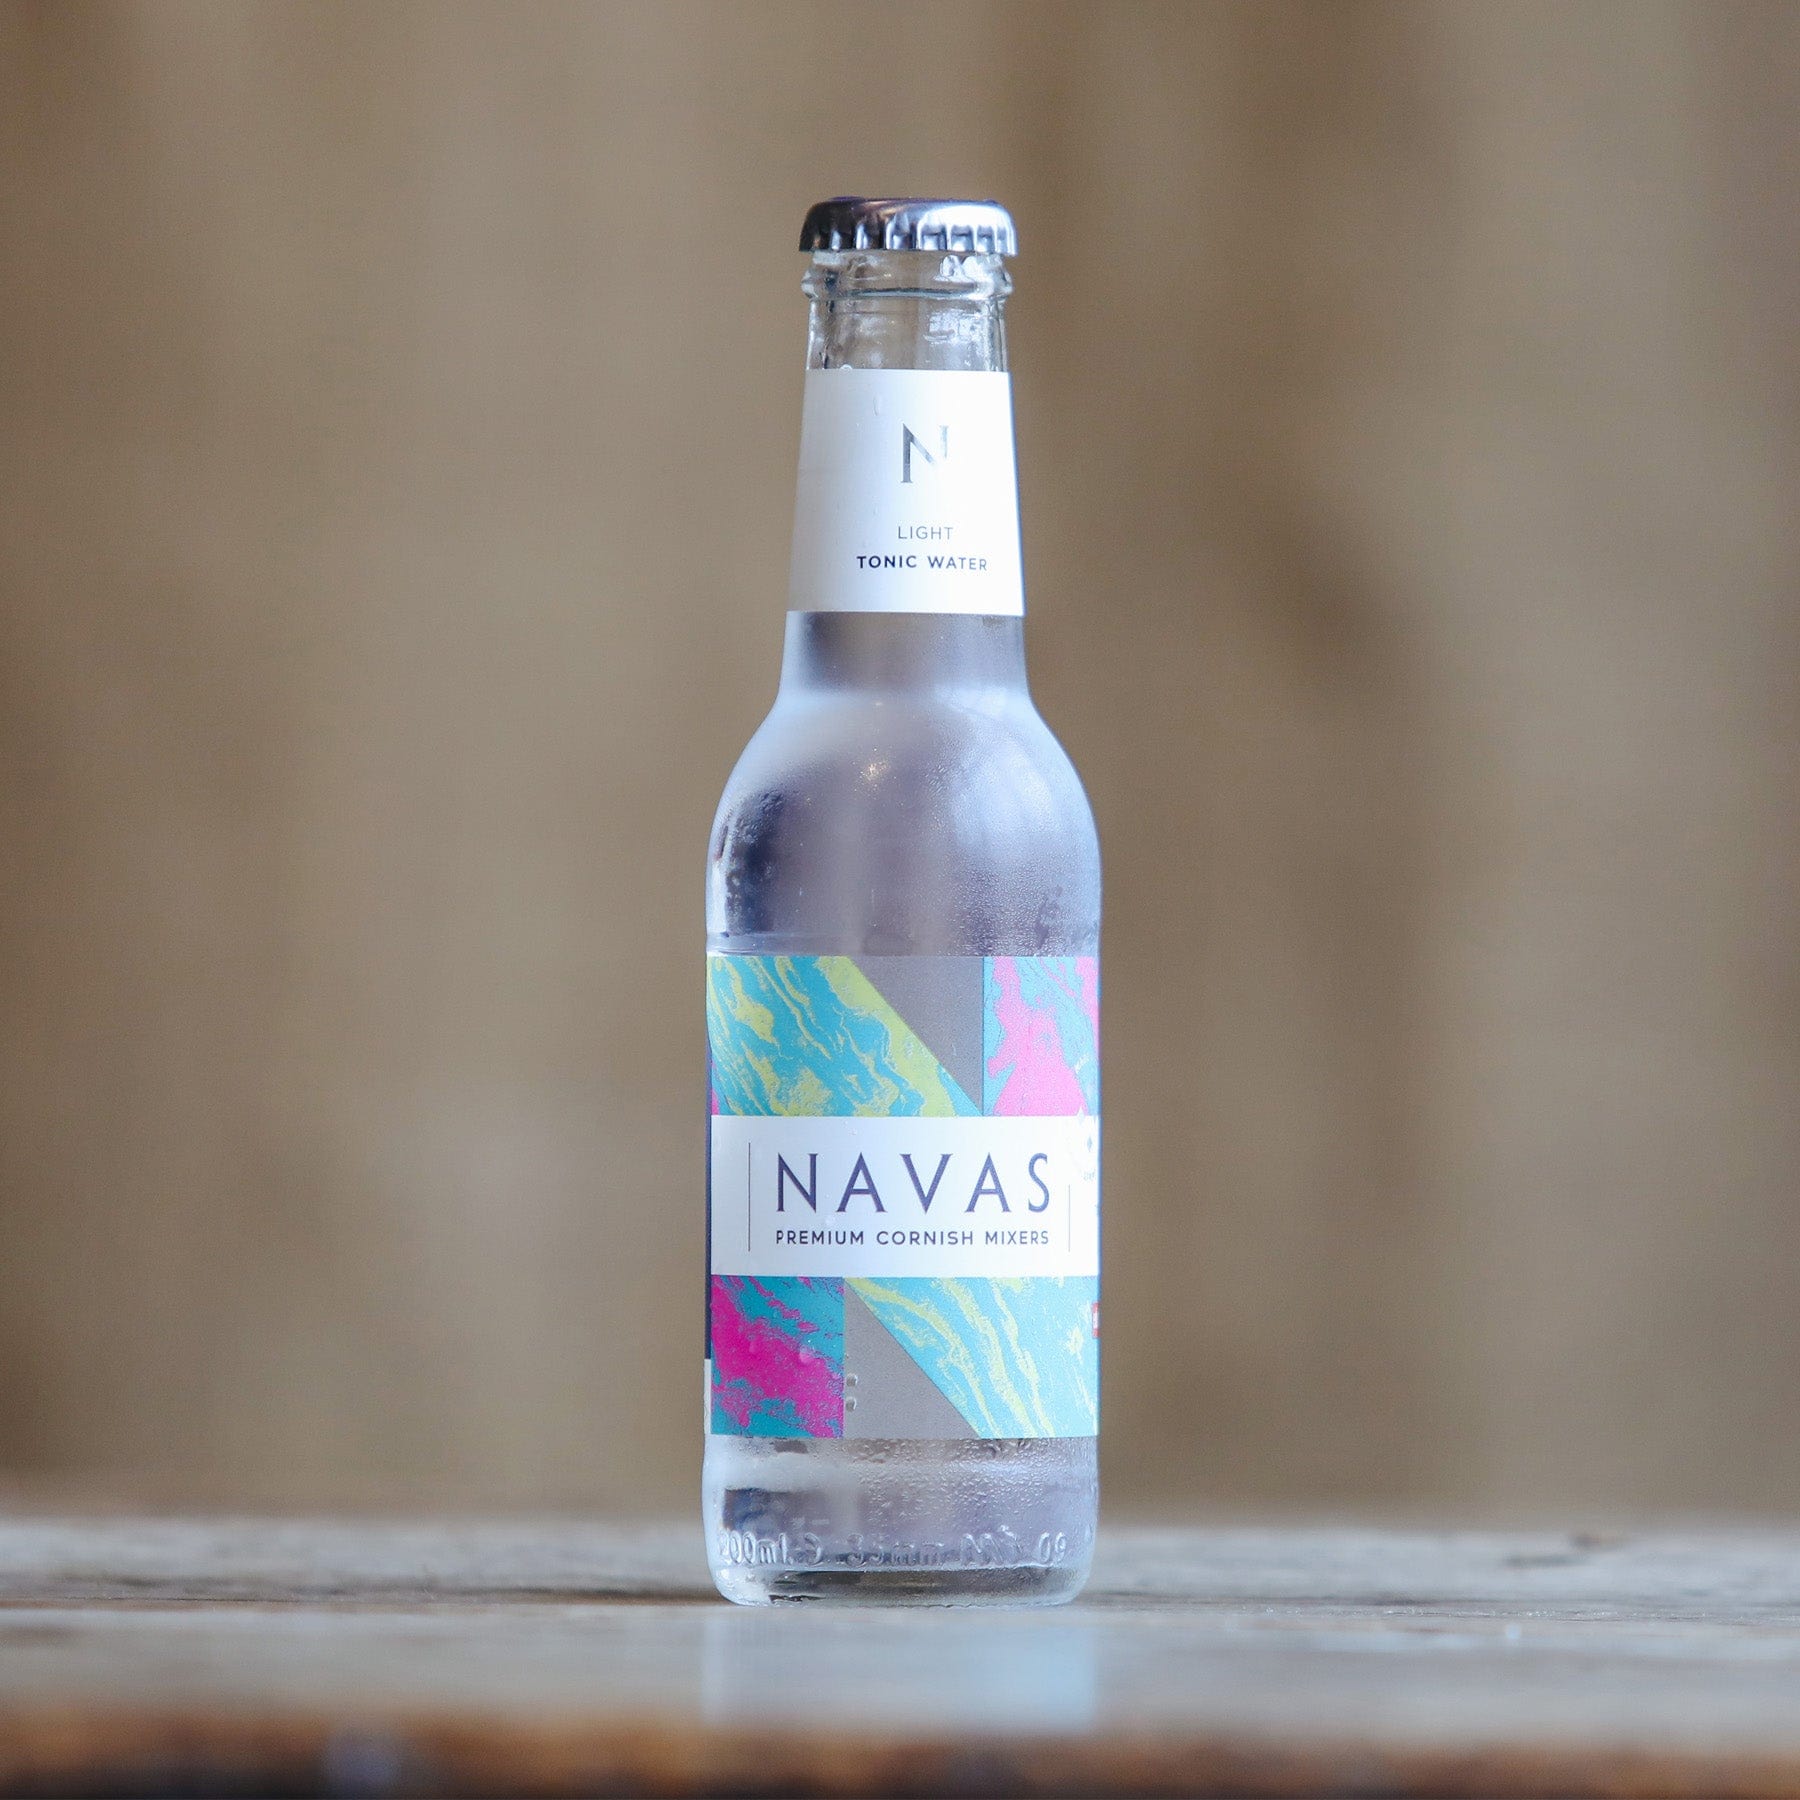 Chilled bottle of Navas light tonic water on wooden surface with colorful label design and blurred background